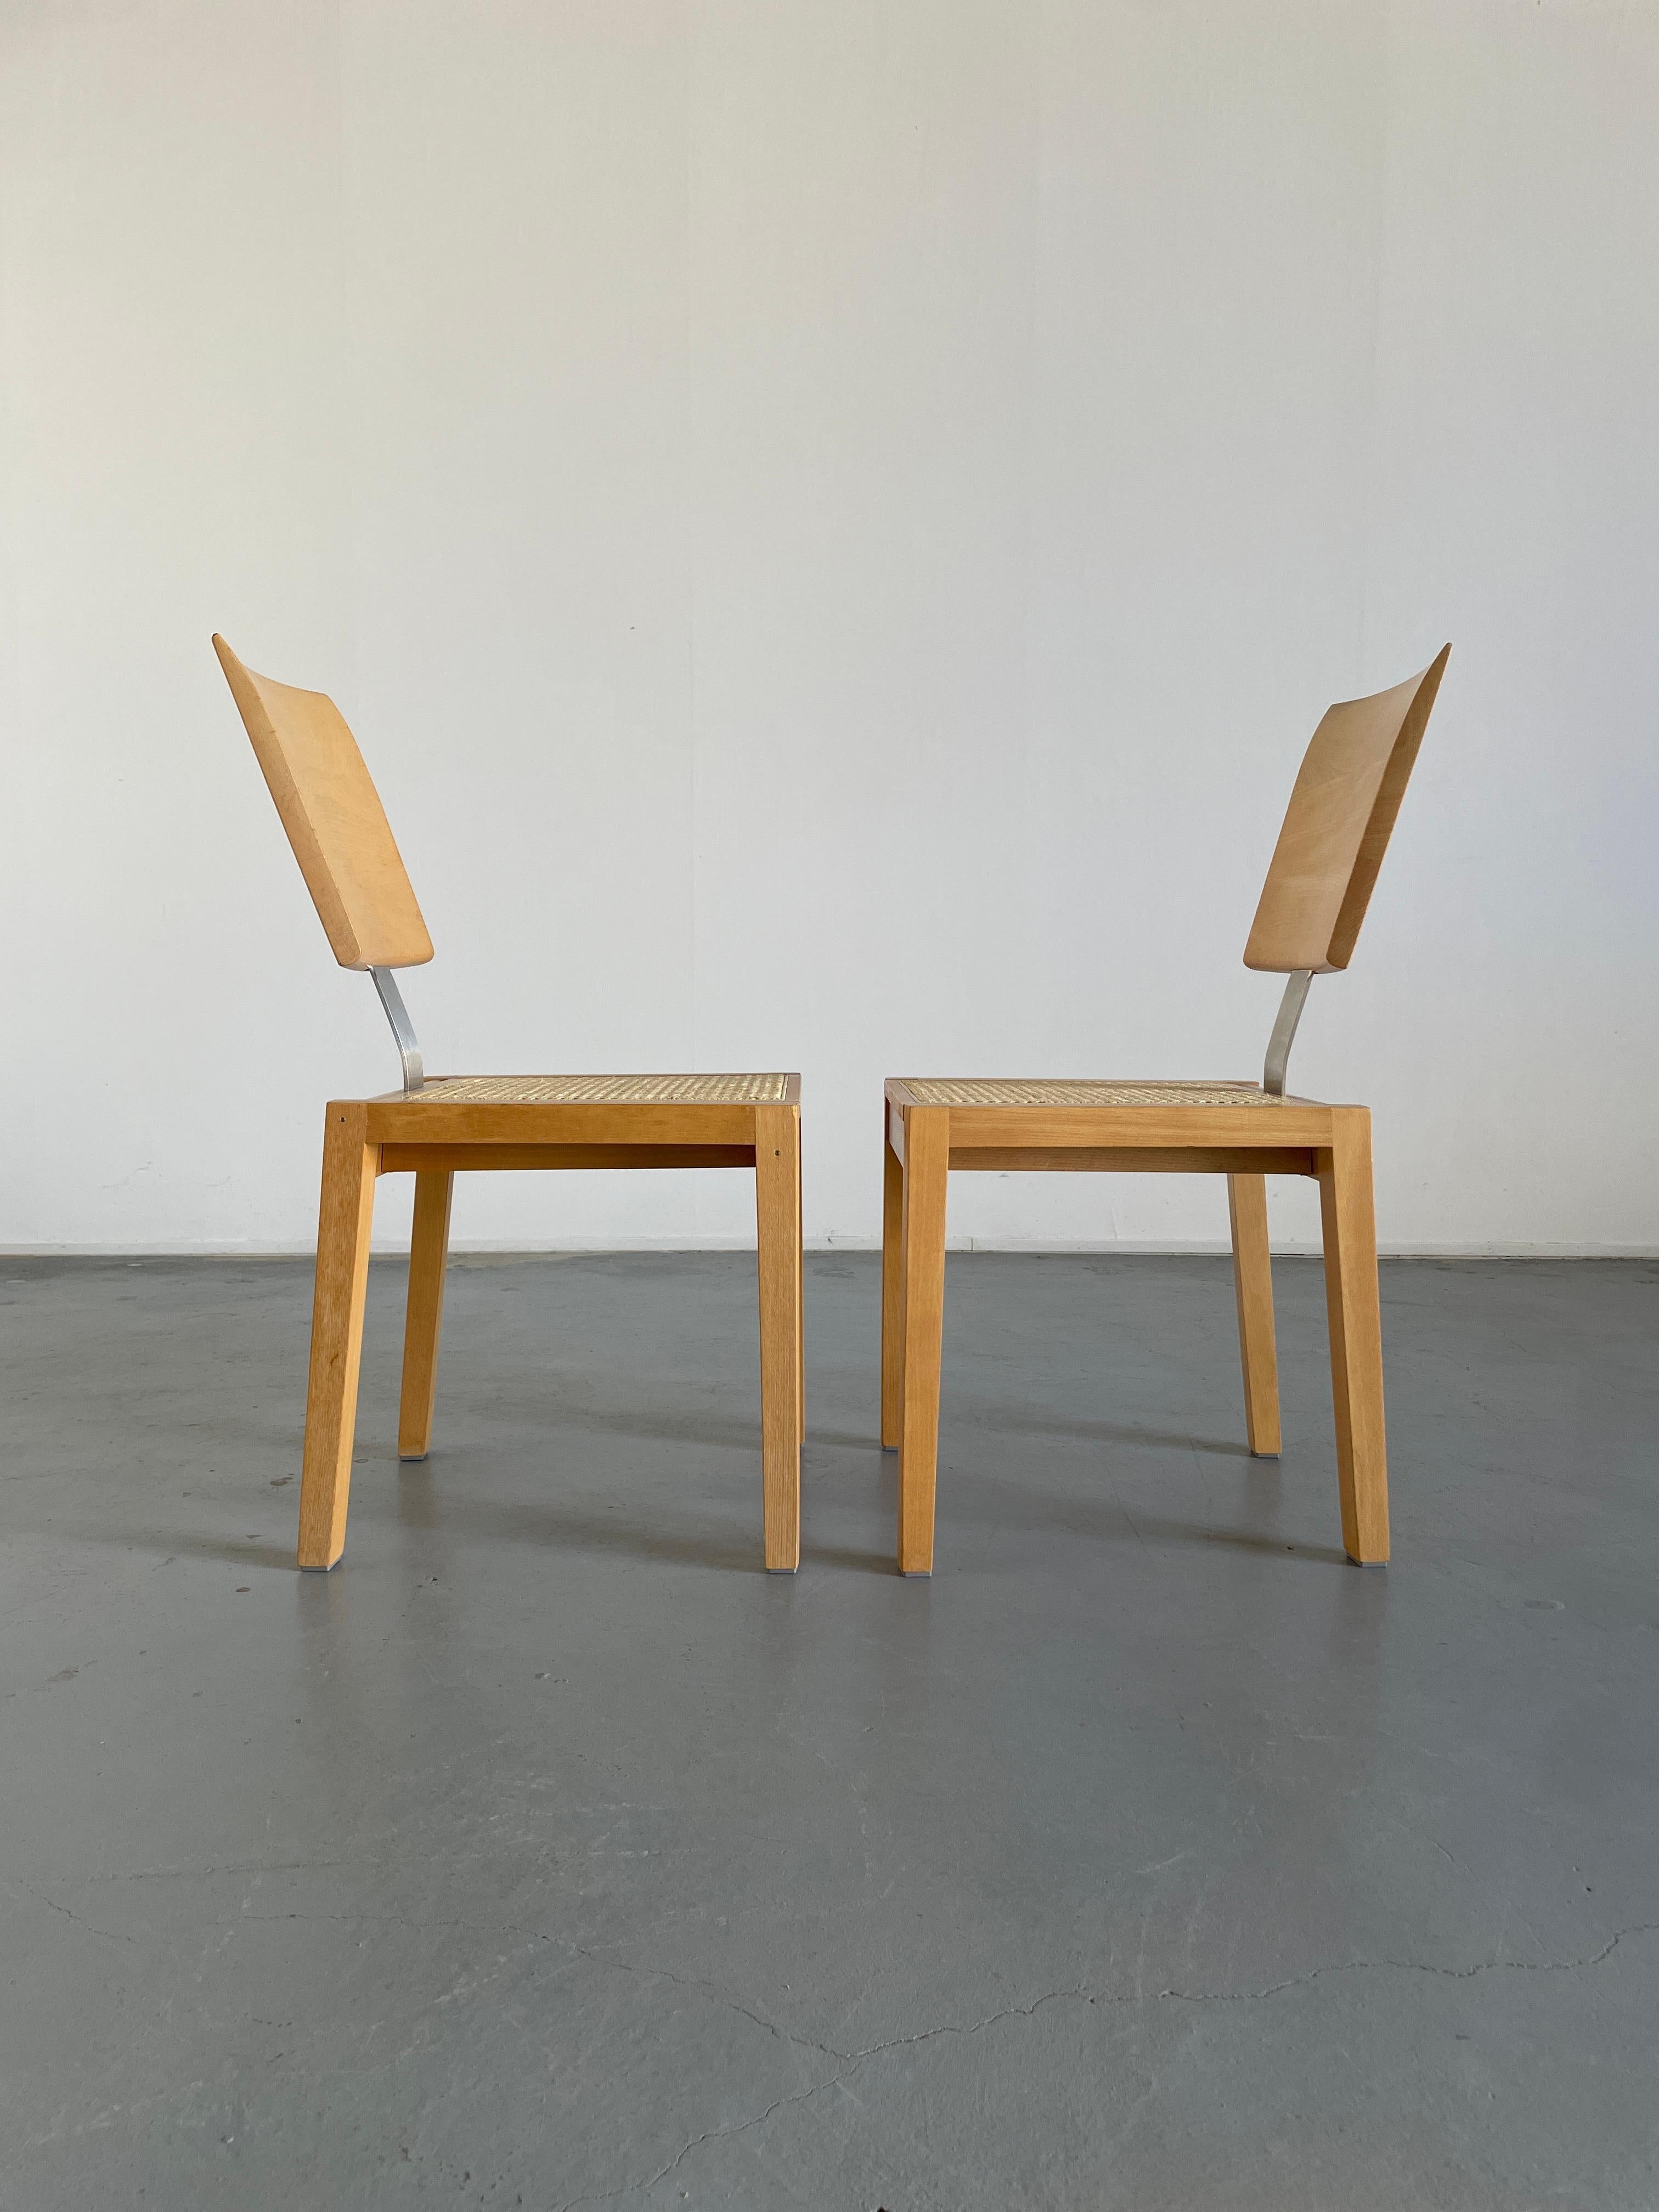 1 of 2 Vintage Postmodern Geometrical Beechwood and Cane Dining Chairs, 1990s In Good Condition For Sale In Zagreb, HR